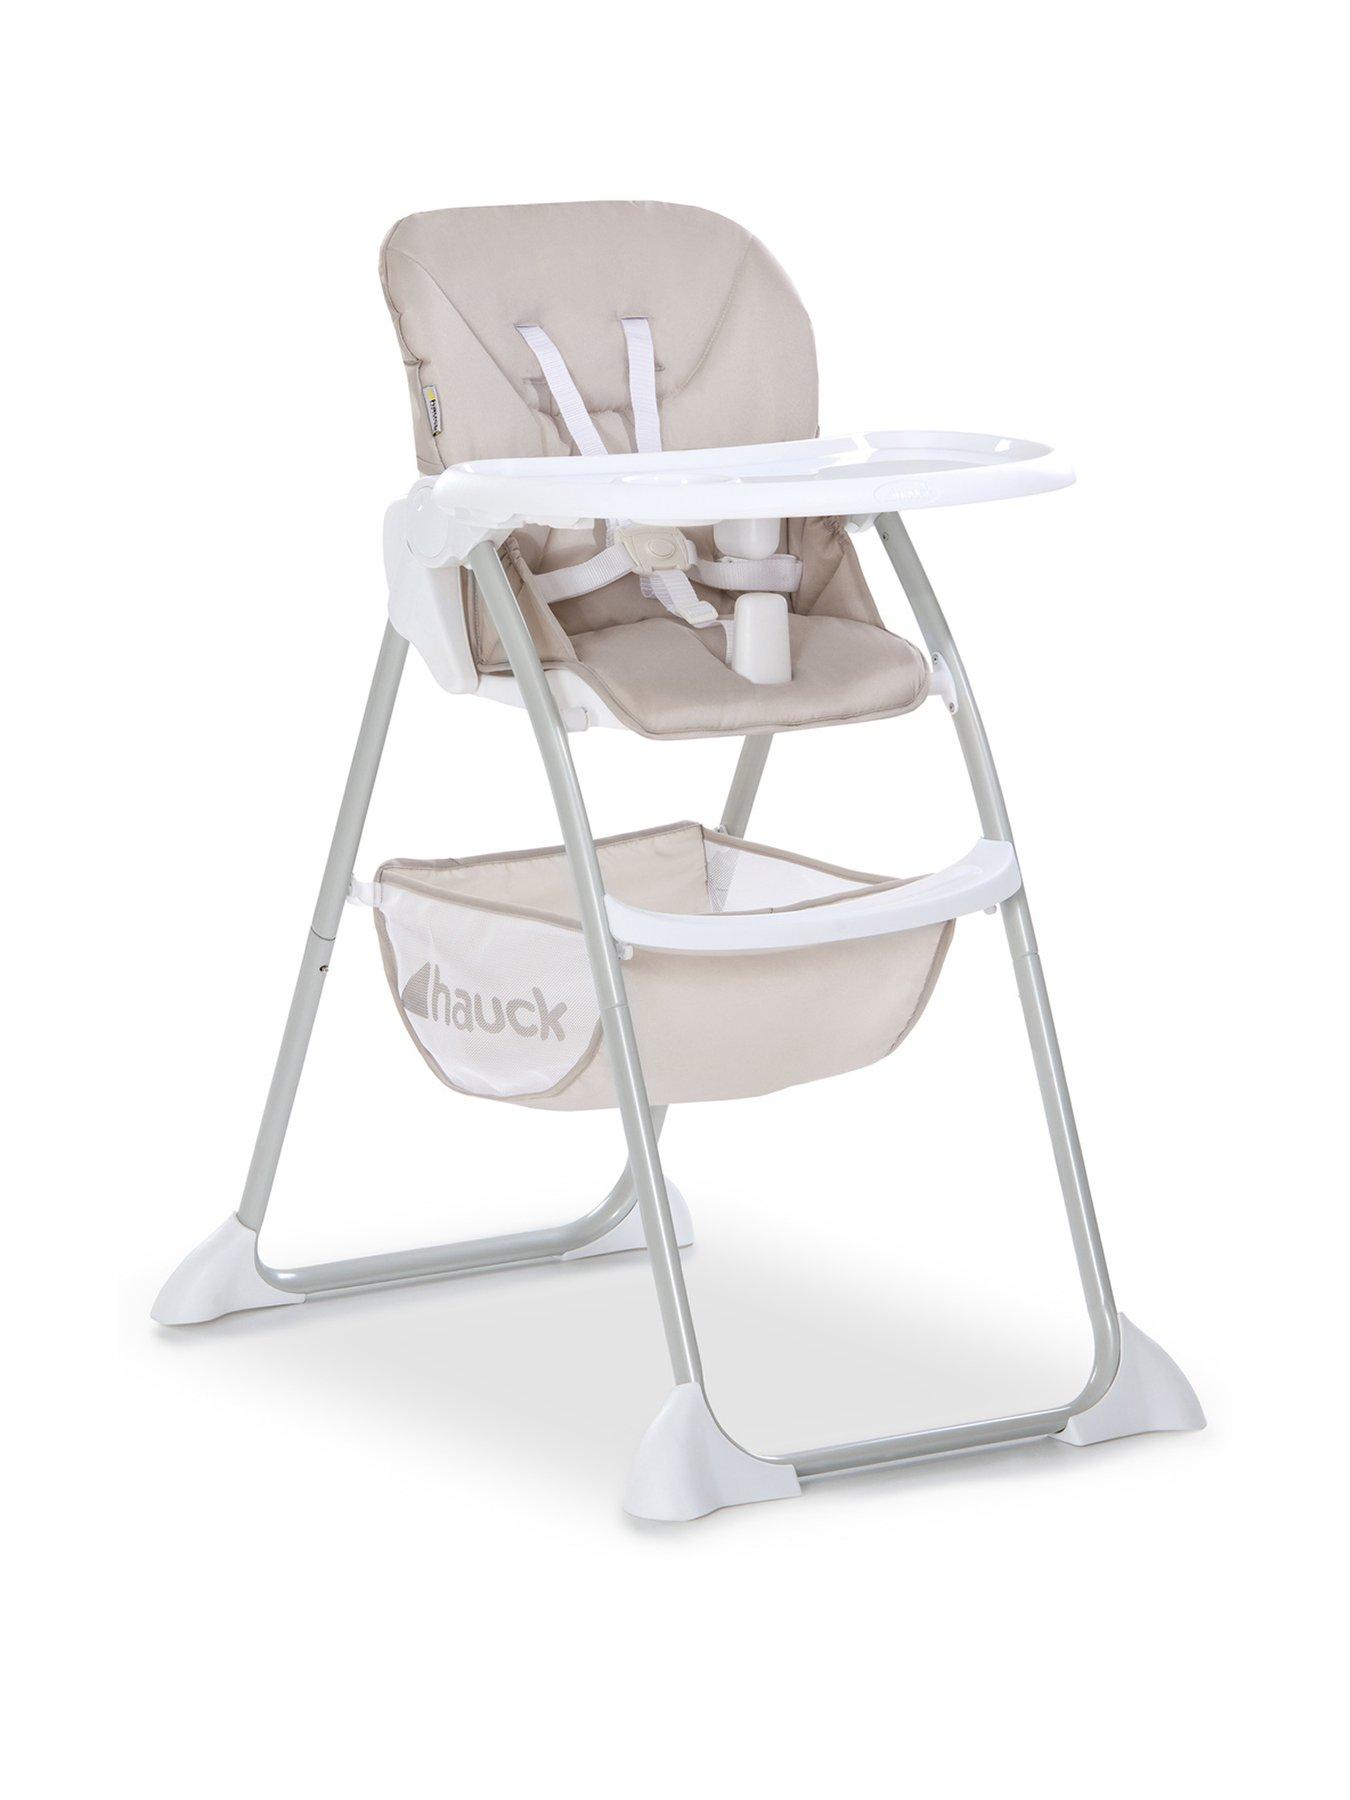 Hauck Alpha Pooh grey Highchair Pad - Baby and Child Store